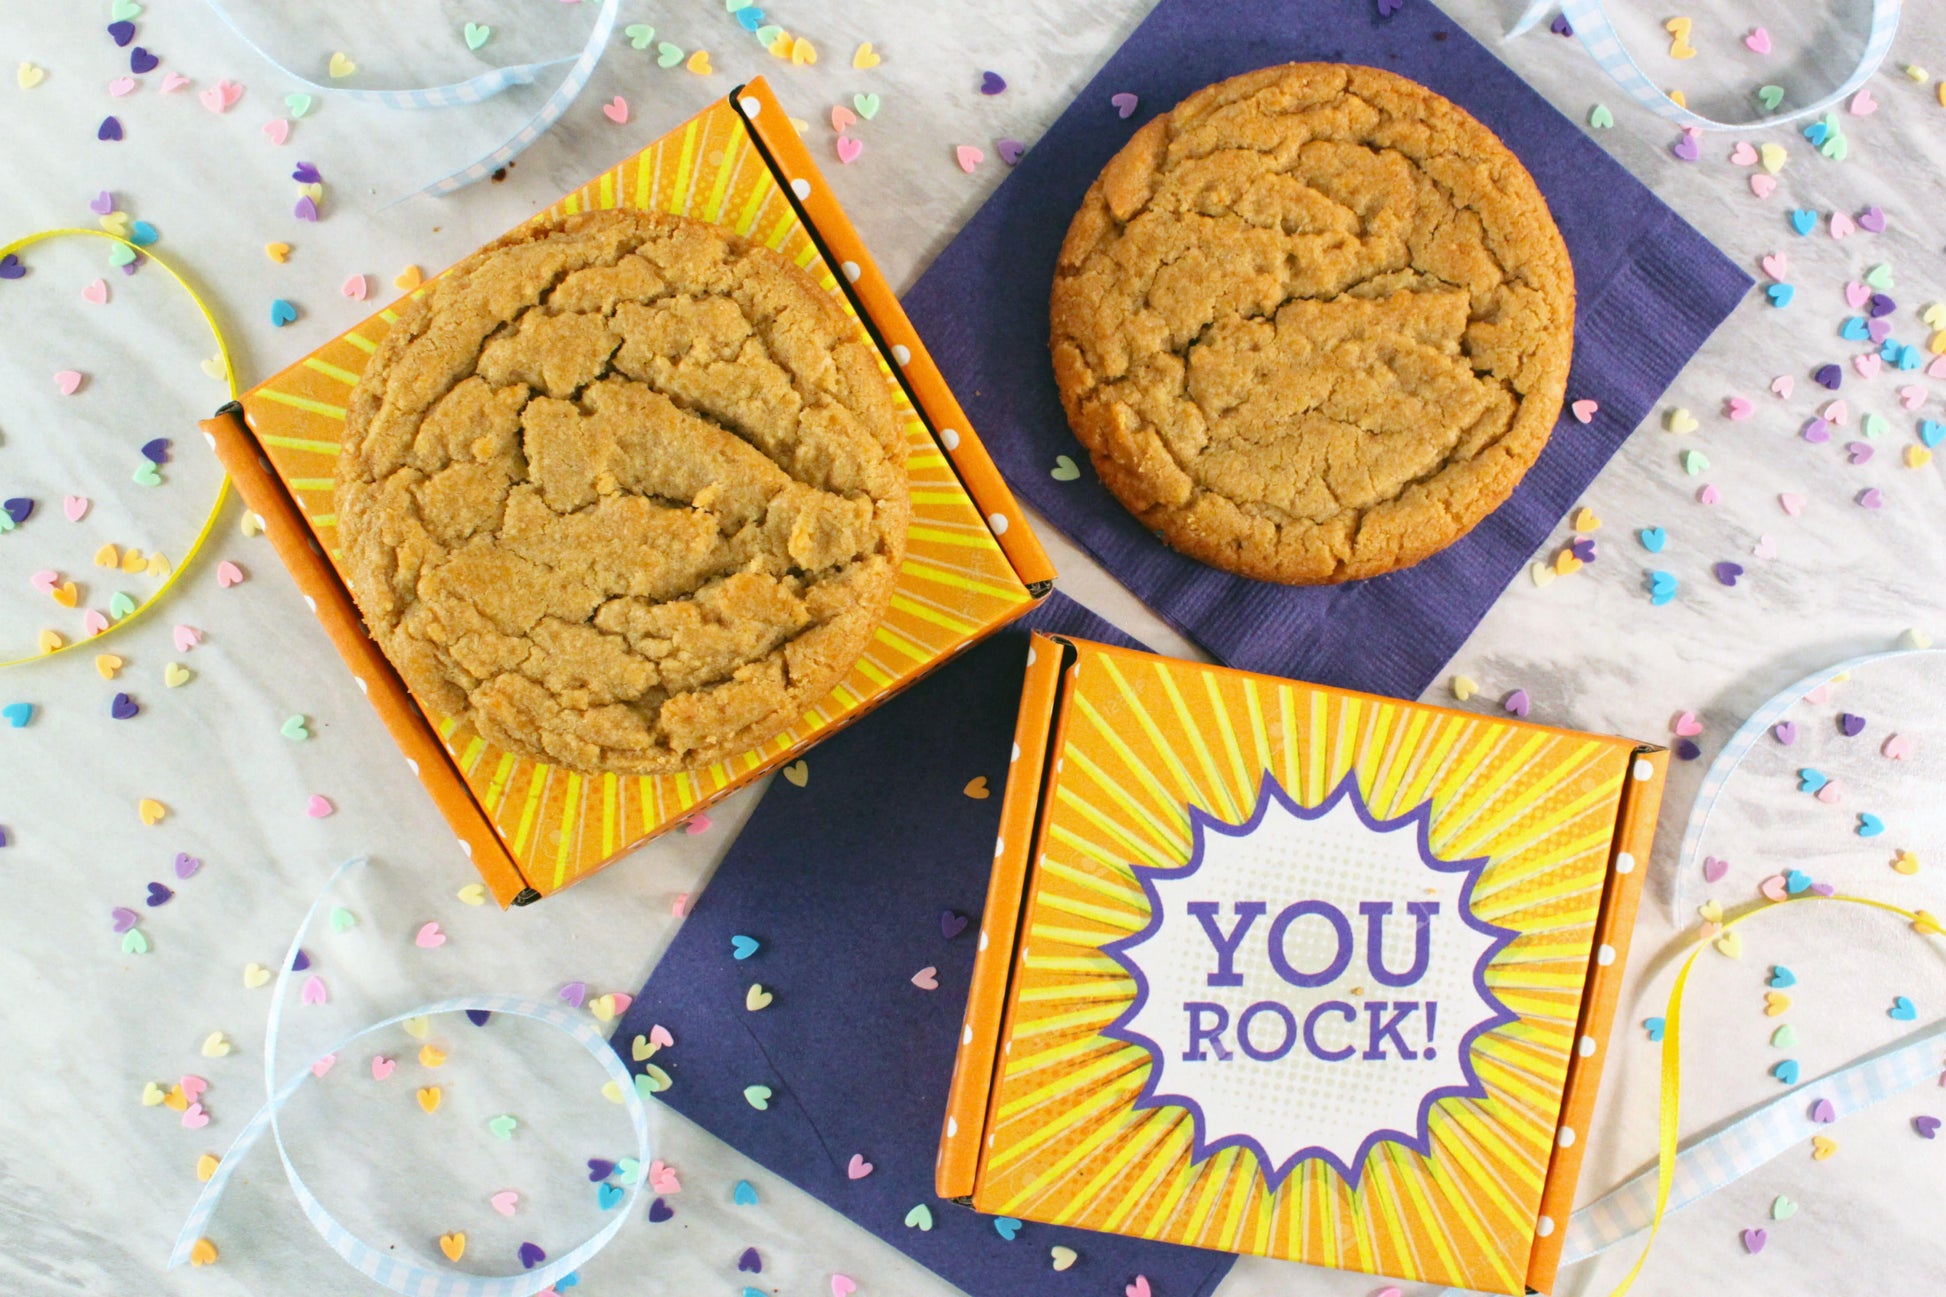 You Rock Pastry Pouch by Sunflour Baking Company